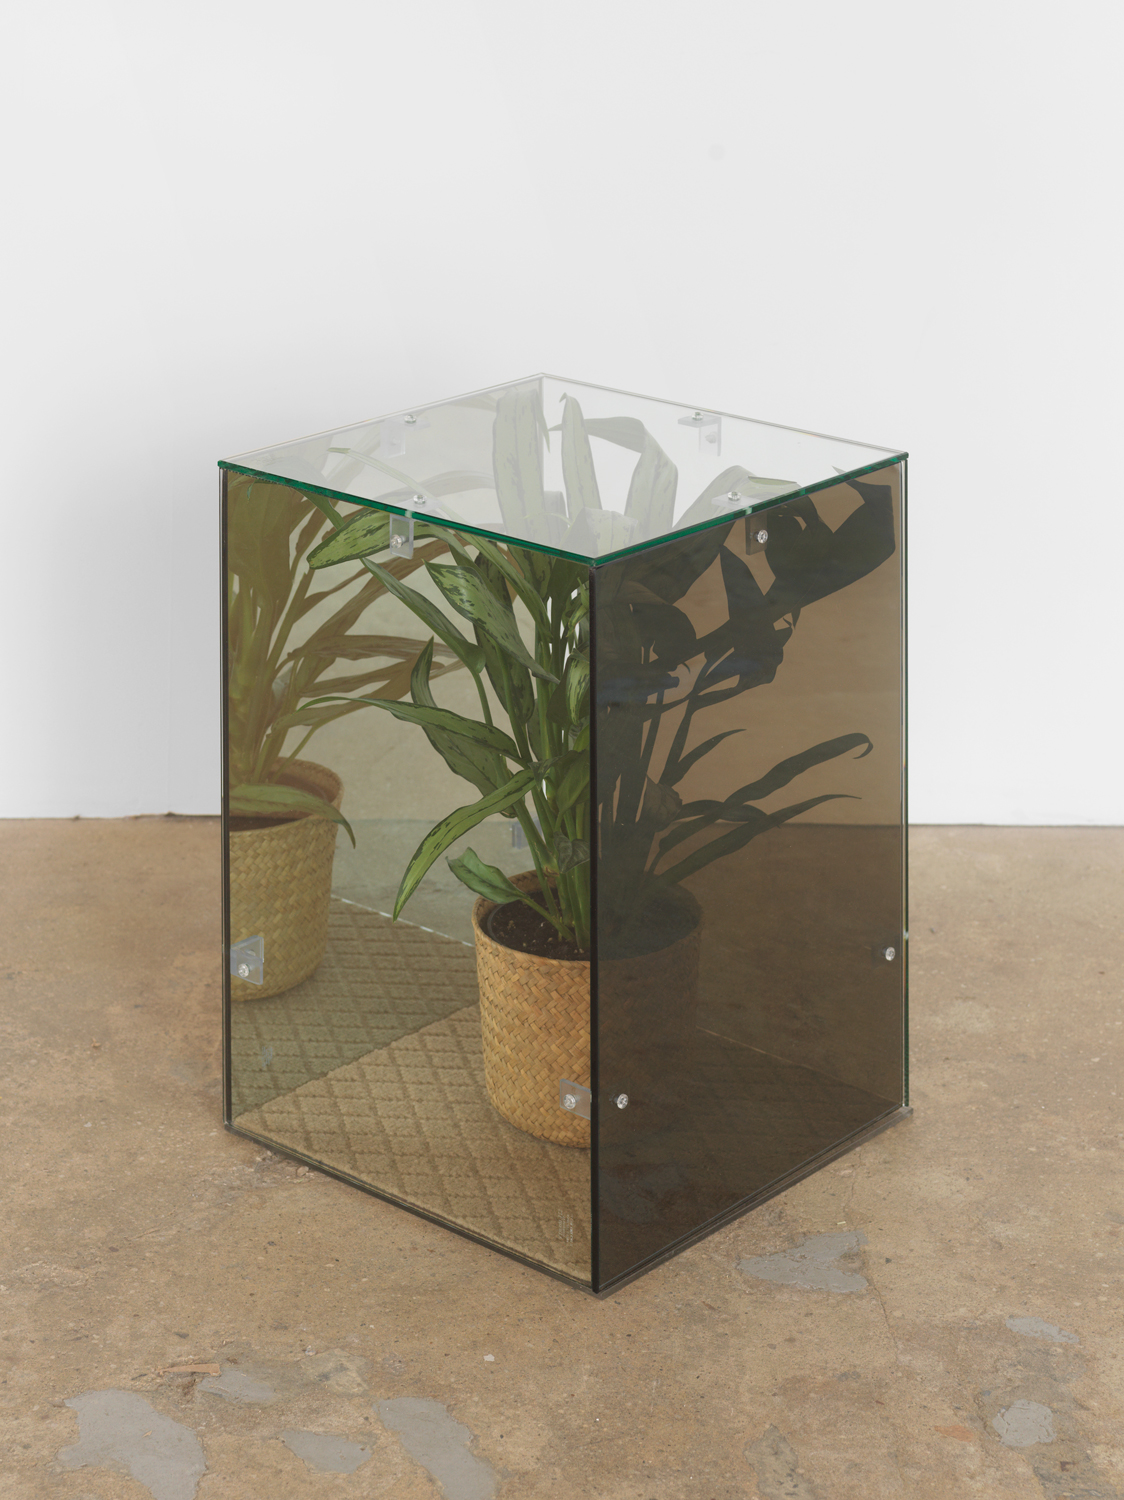 Ethan Breckenridge, Too Soon (Silver Queen), 2010, glass, acrylic, sliver queen plant, 20.50h x 14.50w x 14.50d in.